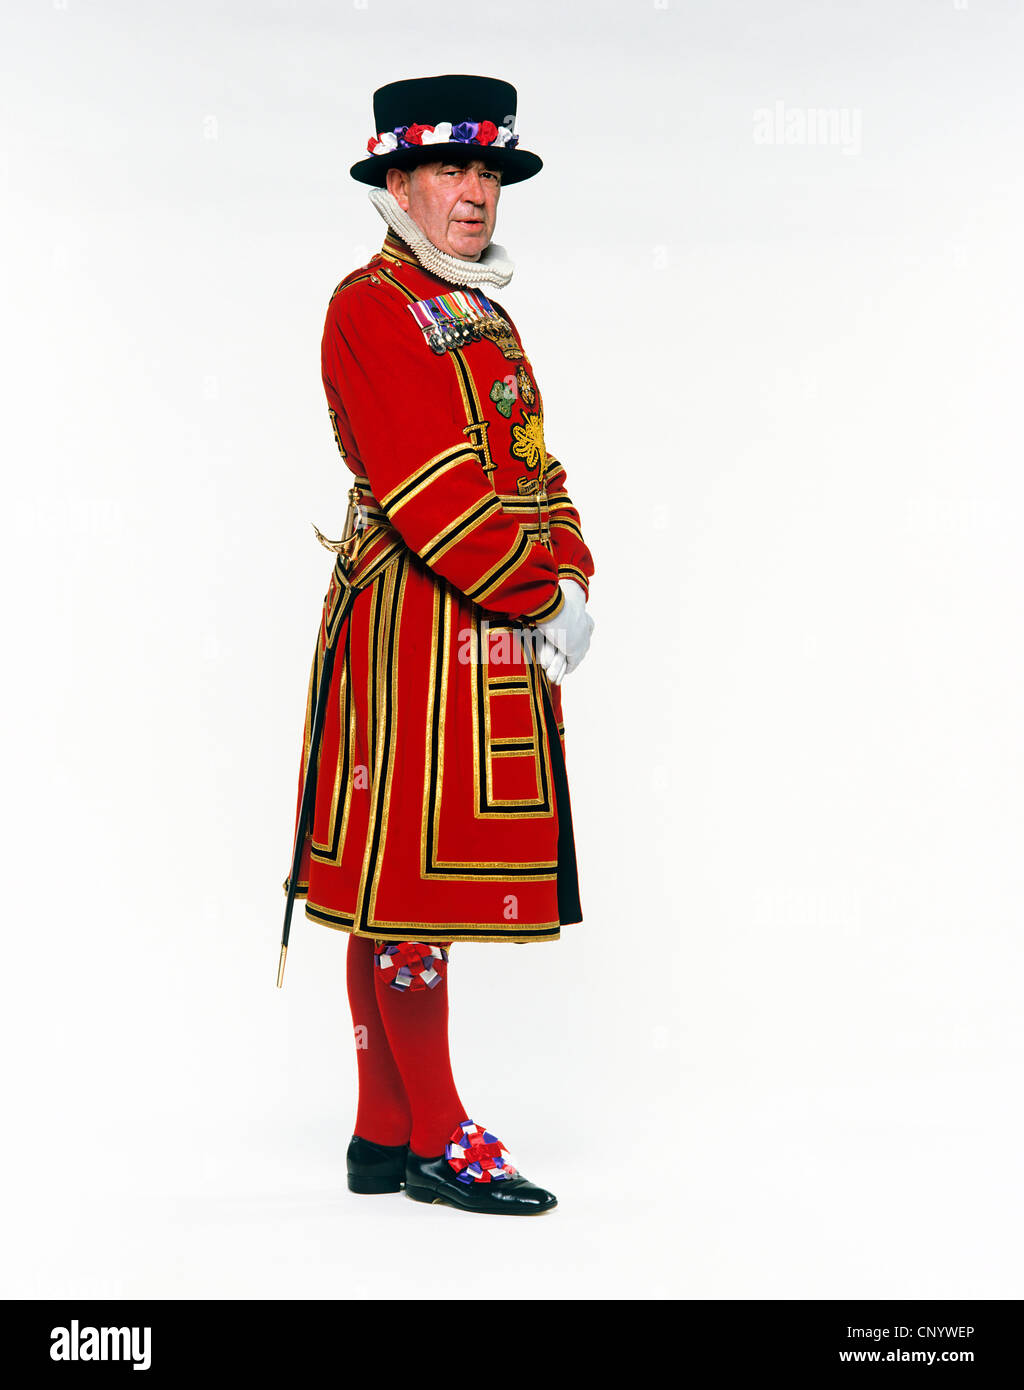 Beefeater or Yeoman Warder at the Tower of London on white background Stock Photo